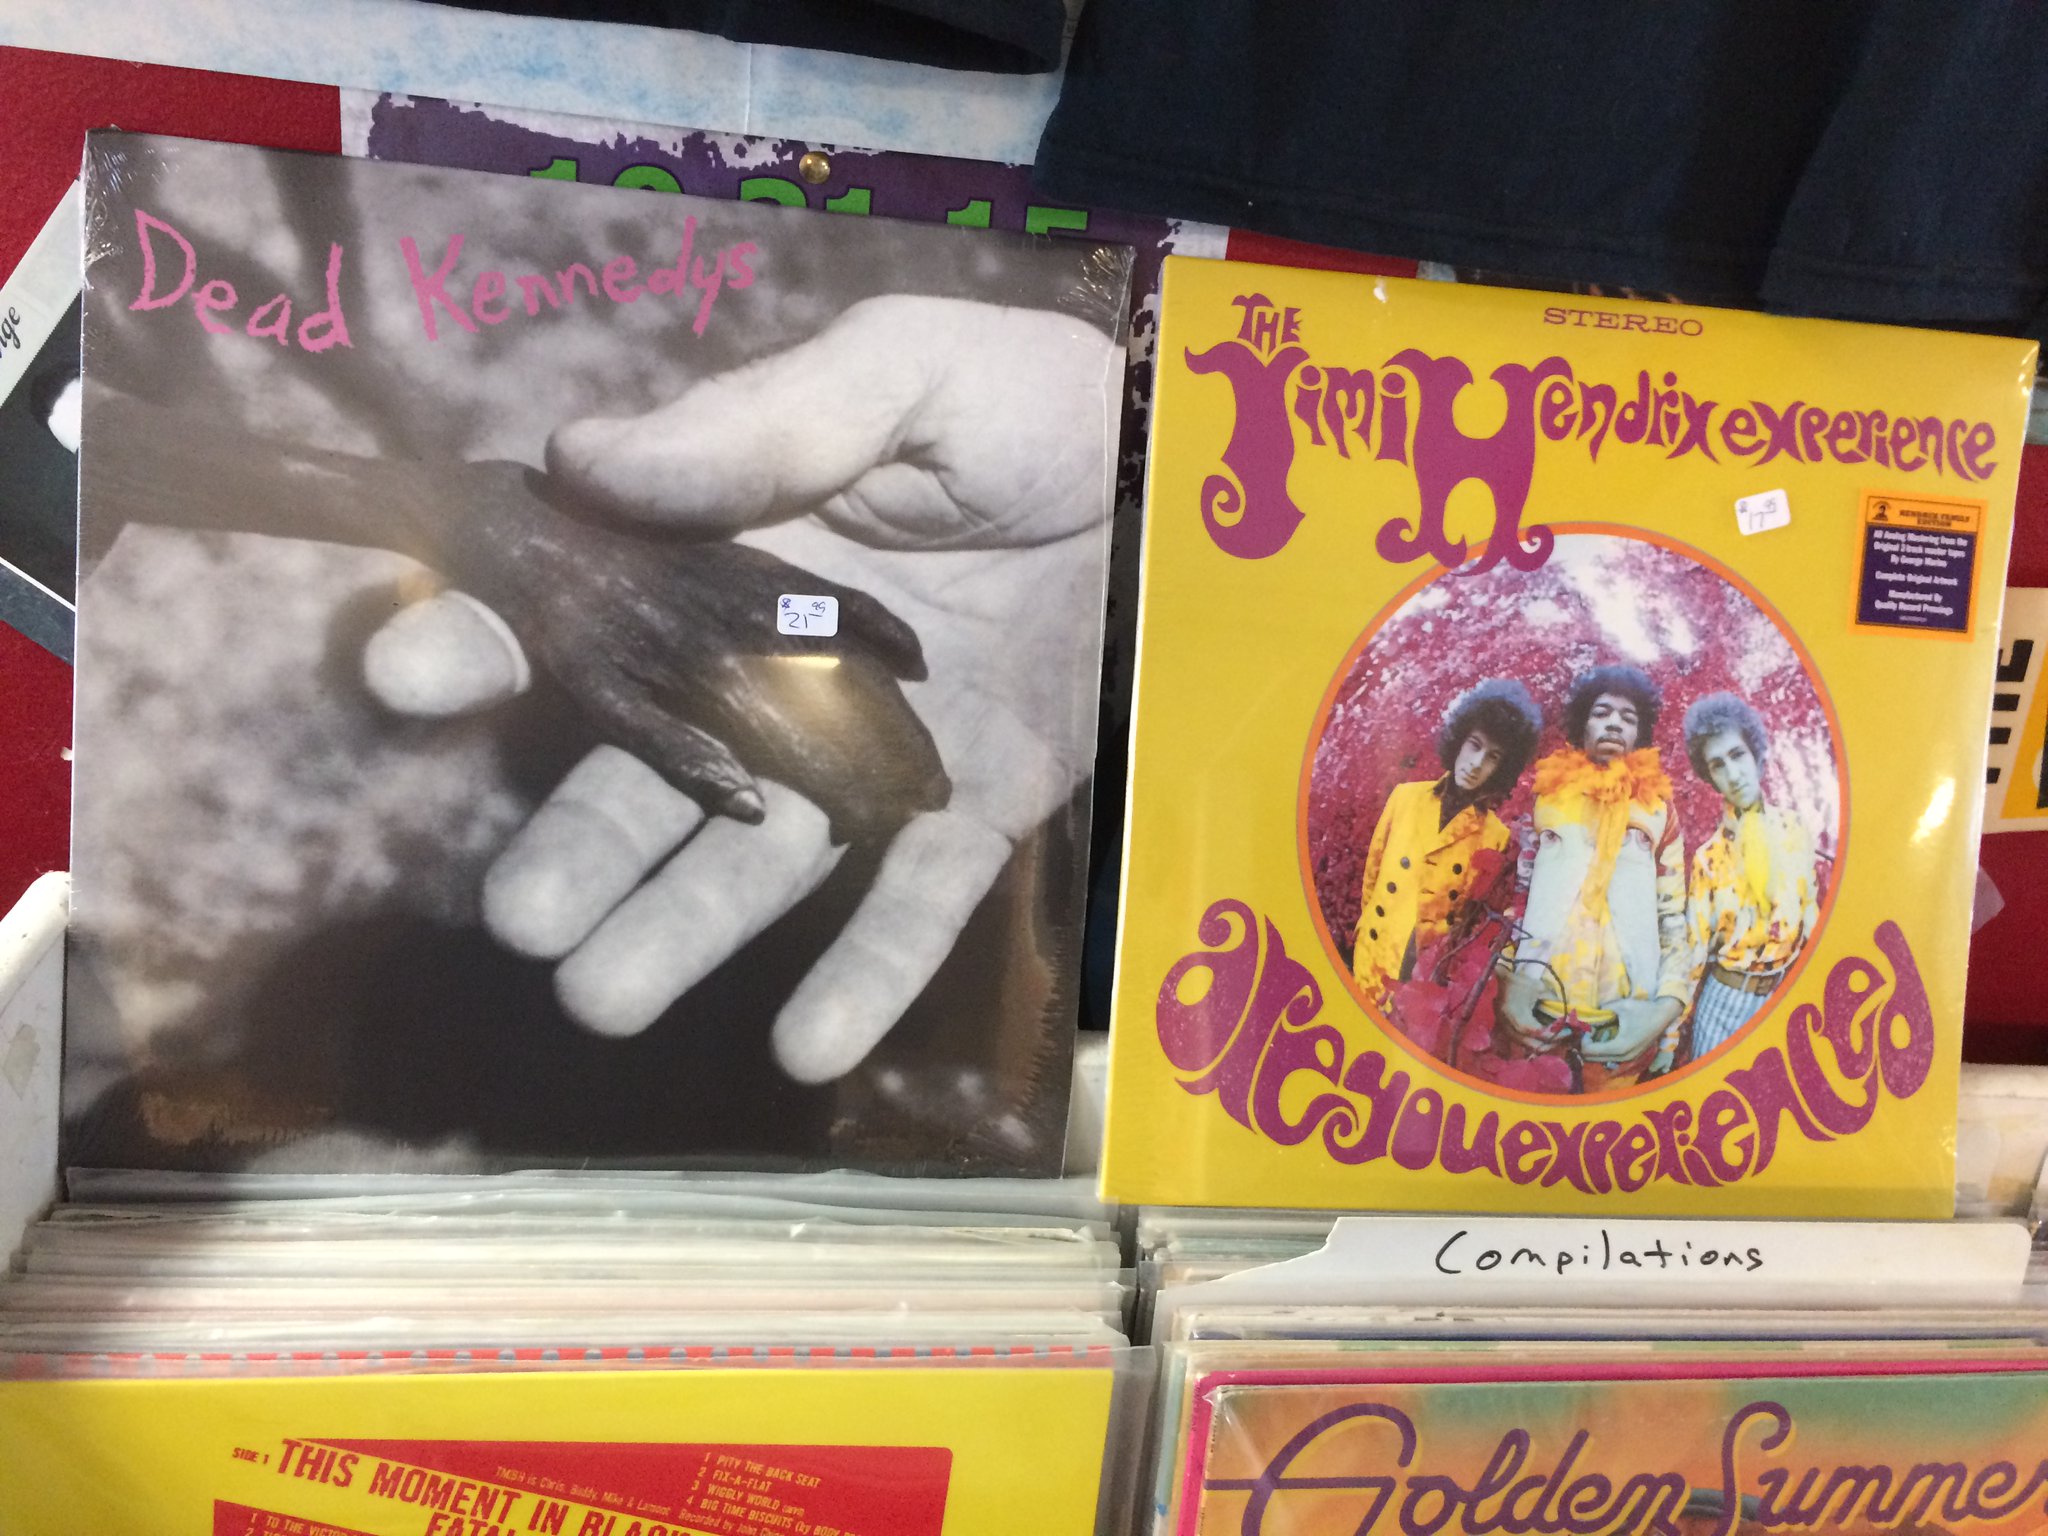 Happy Birthday to D.H. Peligroof the Dead Kennedys & the late Mitch Mitchell of the Jimi Hendrix Experience 